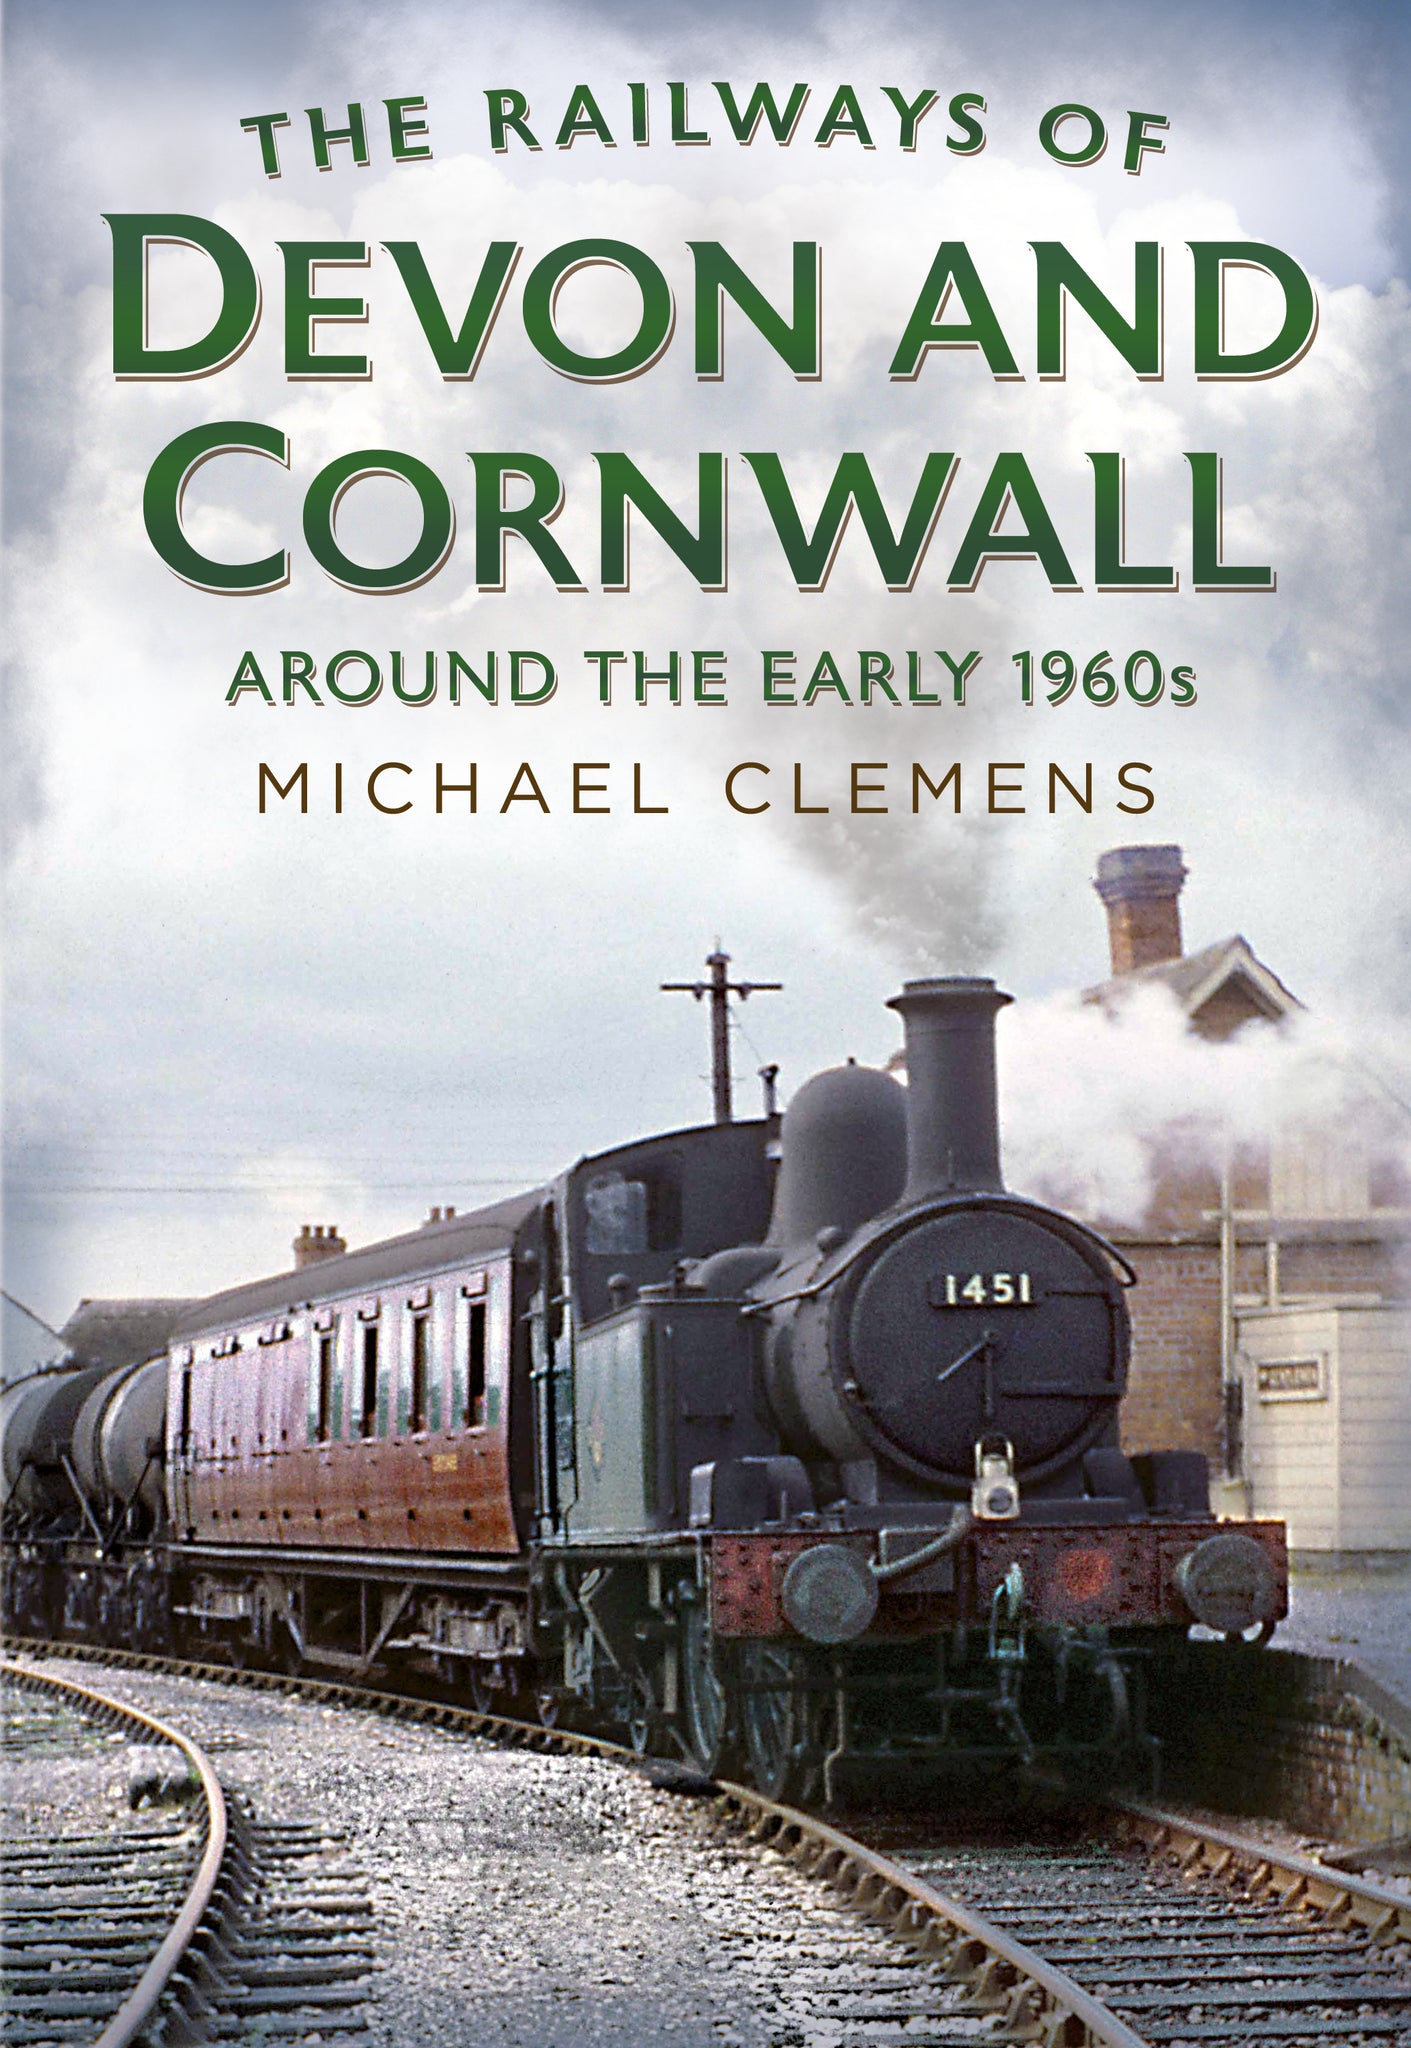 The Railways of Devon and Cornwall Around the Early 1960s (paperback edition)